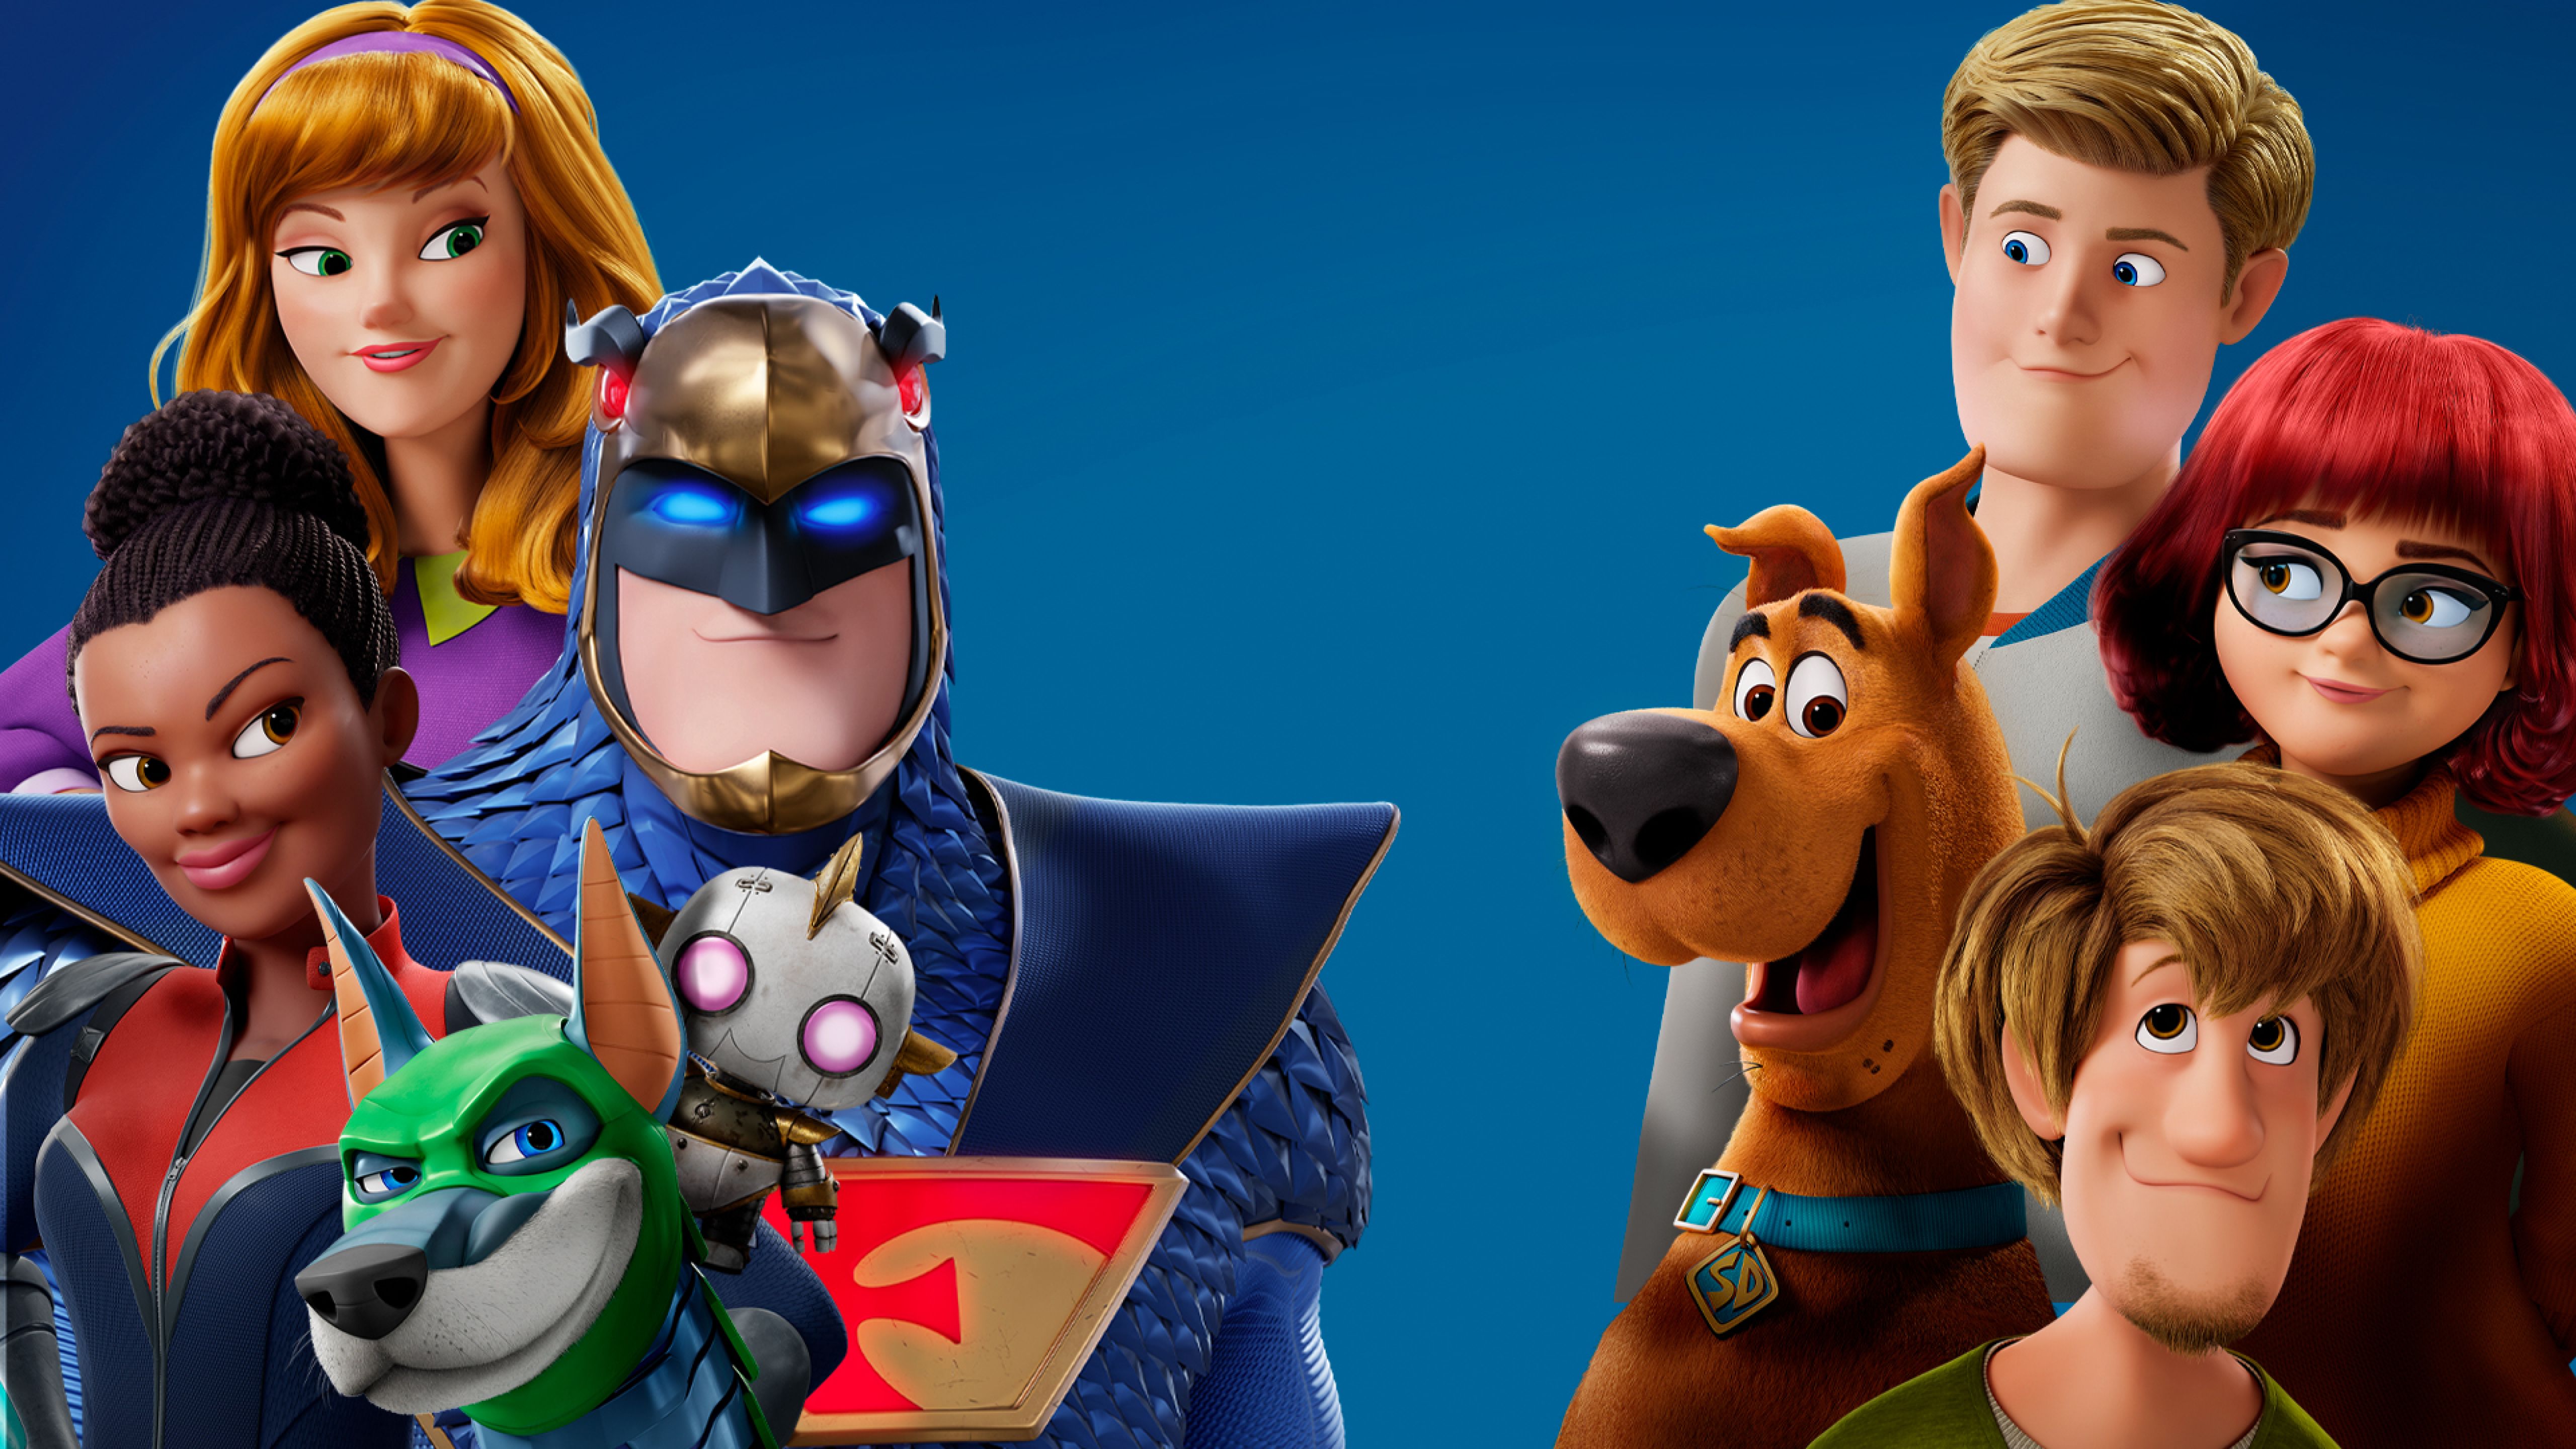 Scoob Movie Characters Poster 5K Wallpaper, HD Movies 4K Wallpaper, Image, Photo and Background